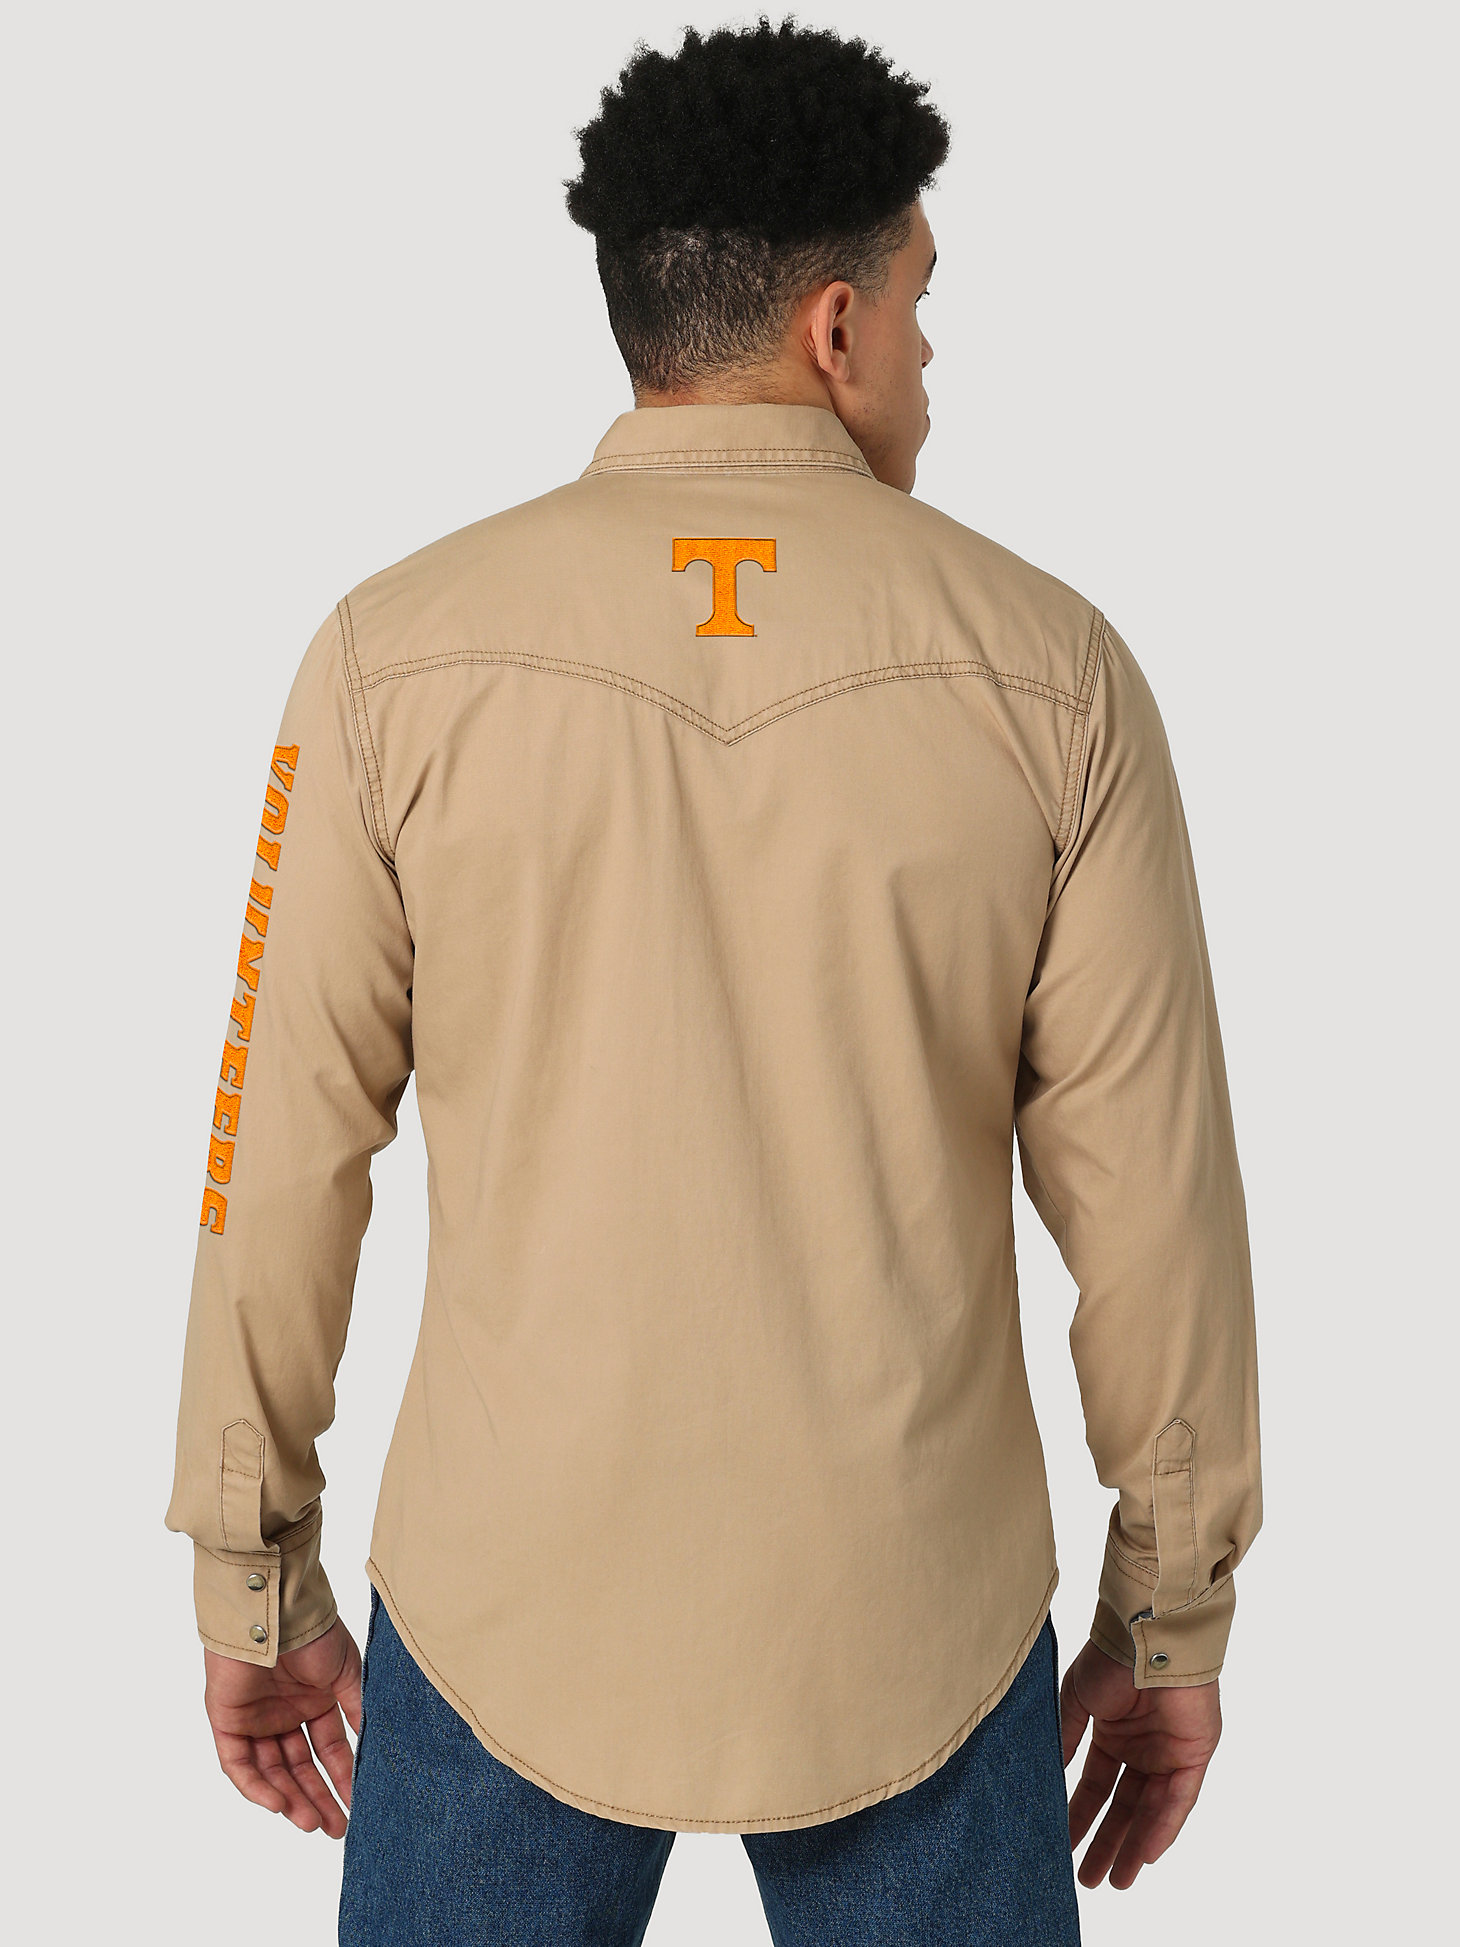 Wrangler Collegiate Embroidered Twill Western Snap Shirt in University of Tennessee alternative view 1